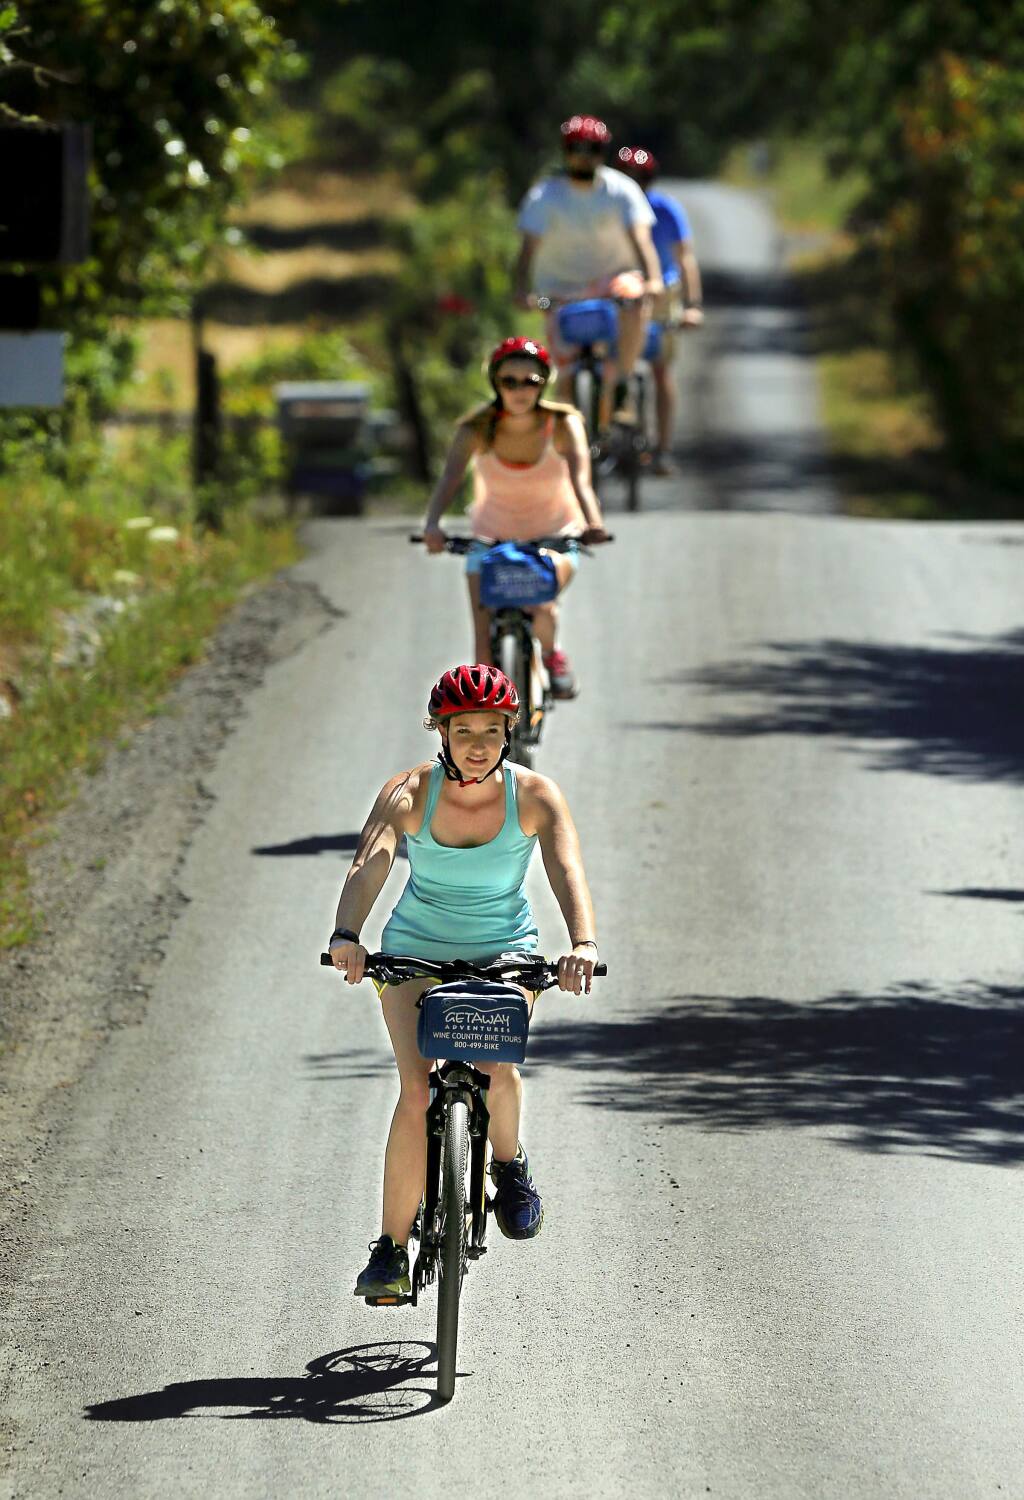 Sara Babineau leads a group of friends from Wisconsin on a bike ride to Iron Horse Vineyards on their pedal n' paddle trip with Gateway Adventures. (JOHN BURGESS/The Press Democrat)